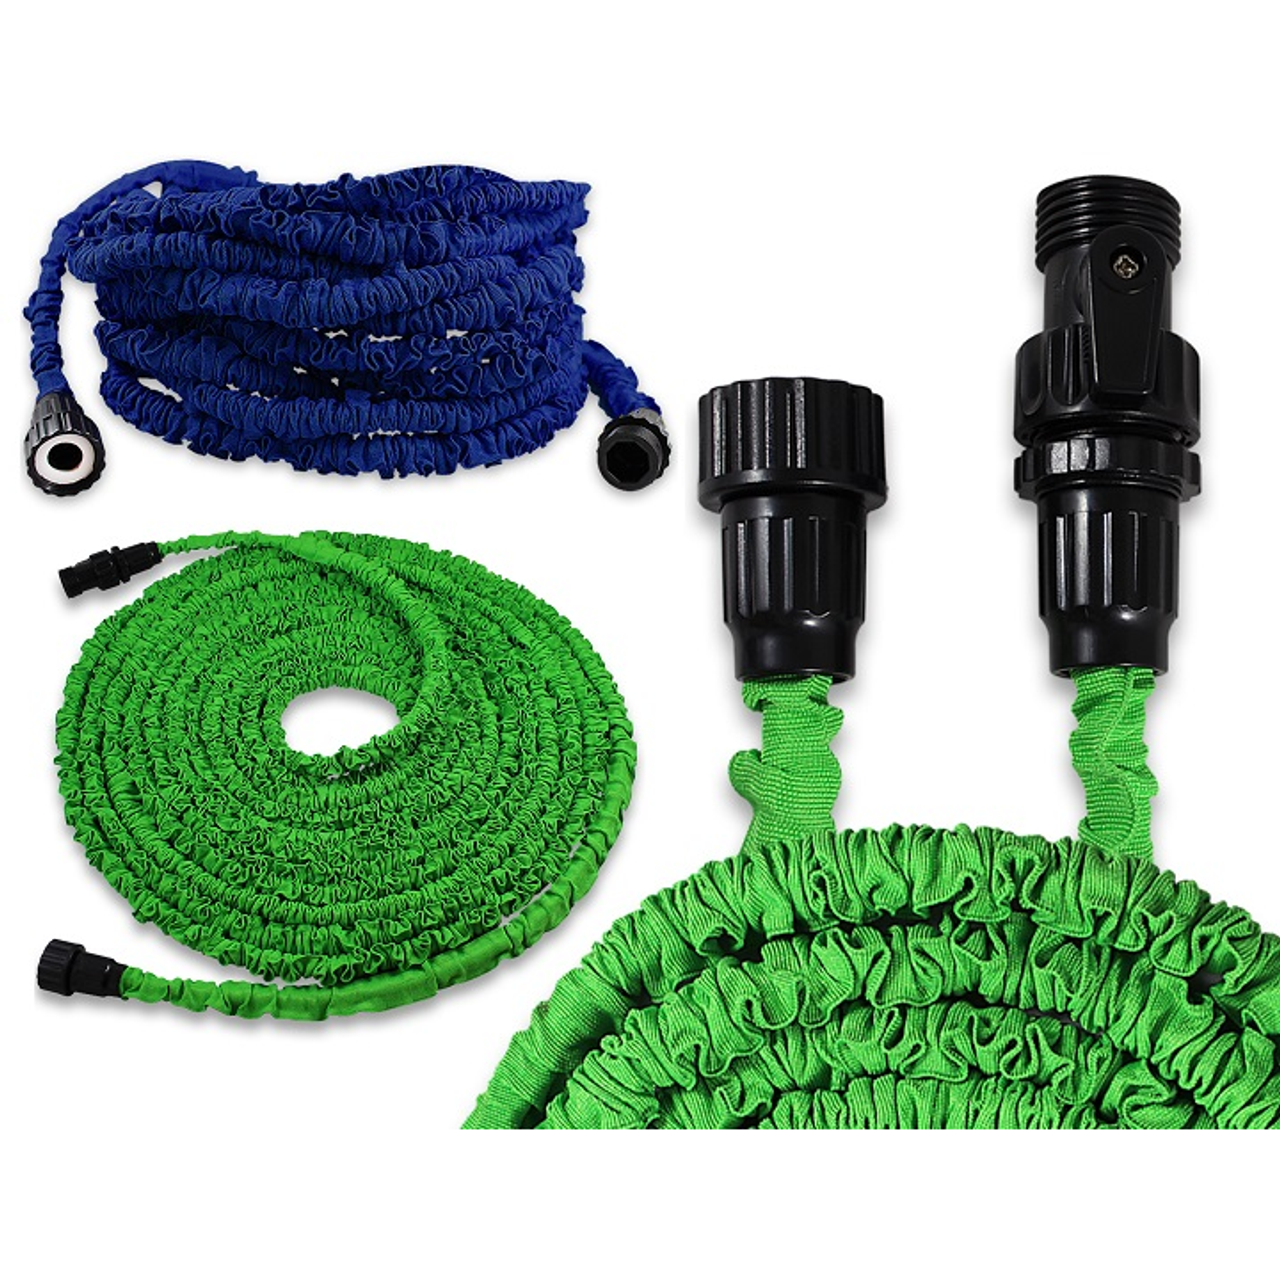 Deluxe Expandable and Flexible Garden Hose (2 colors)